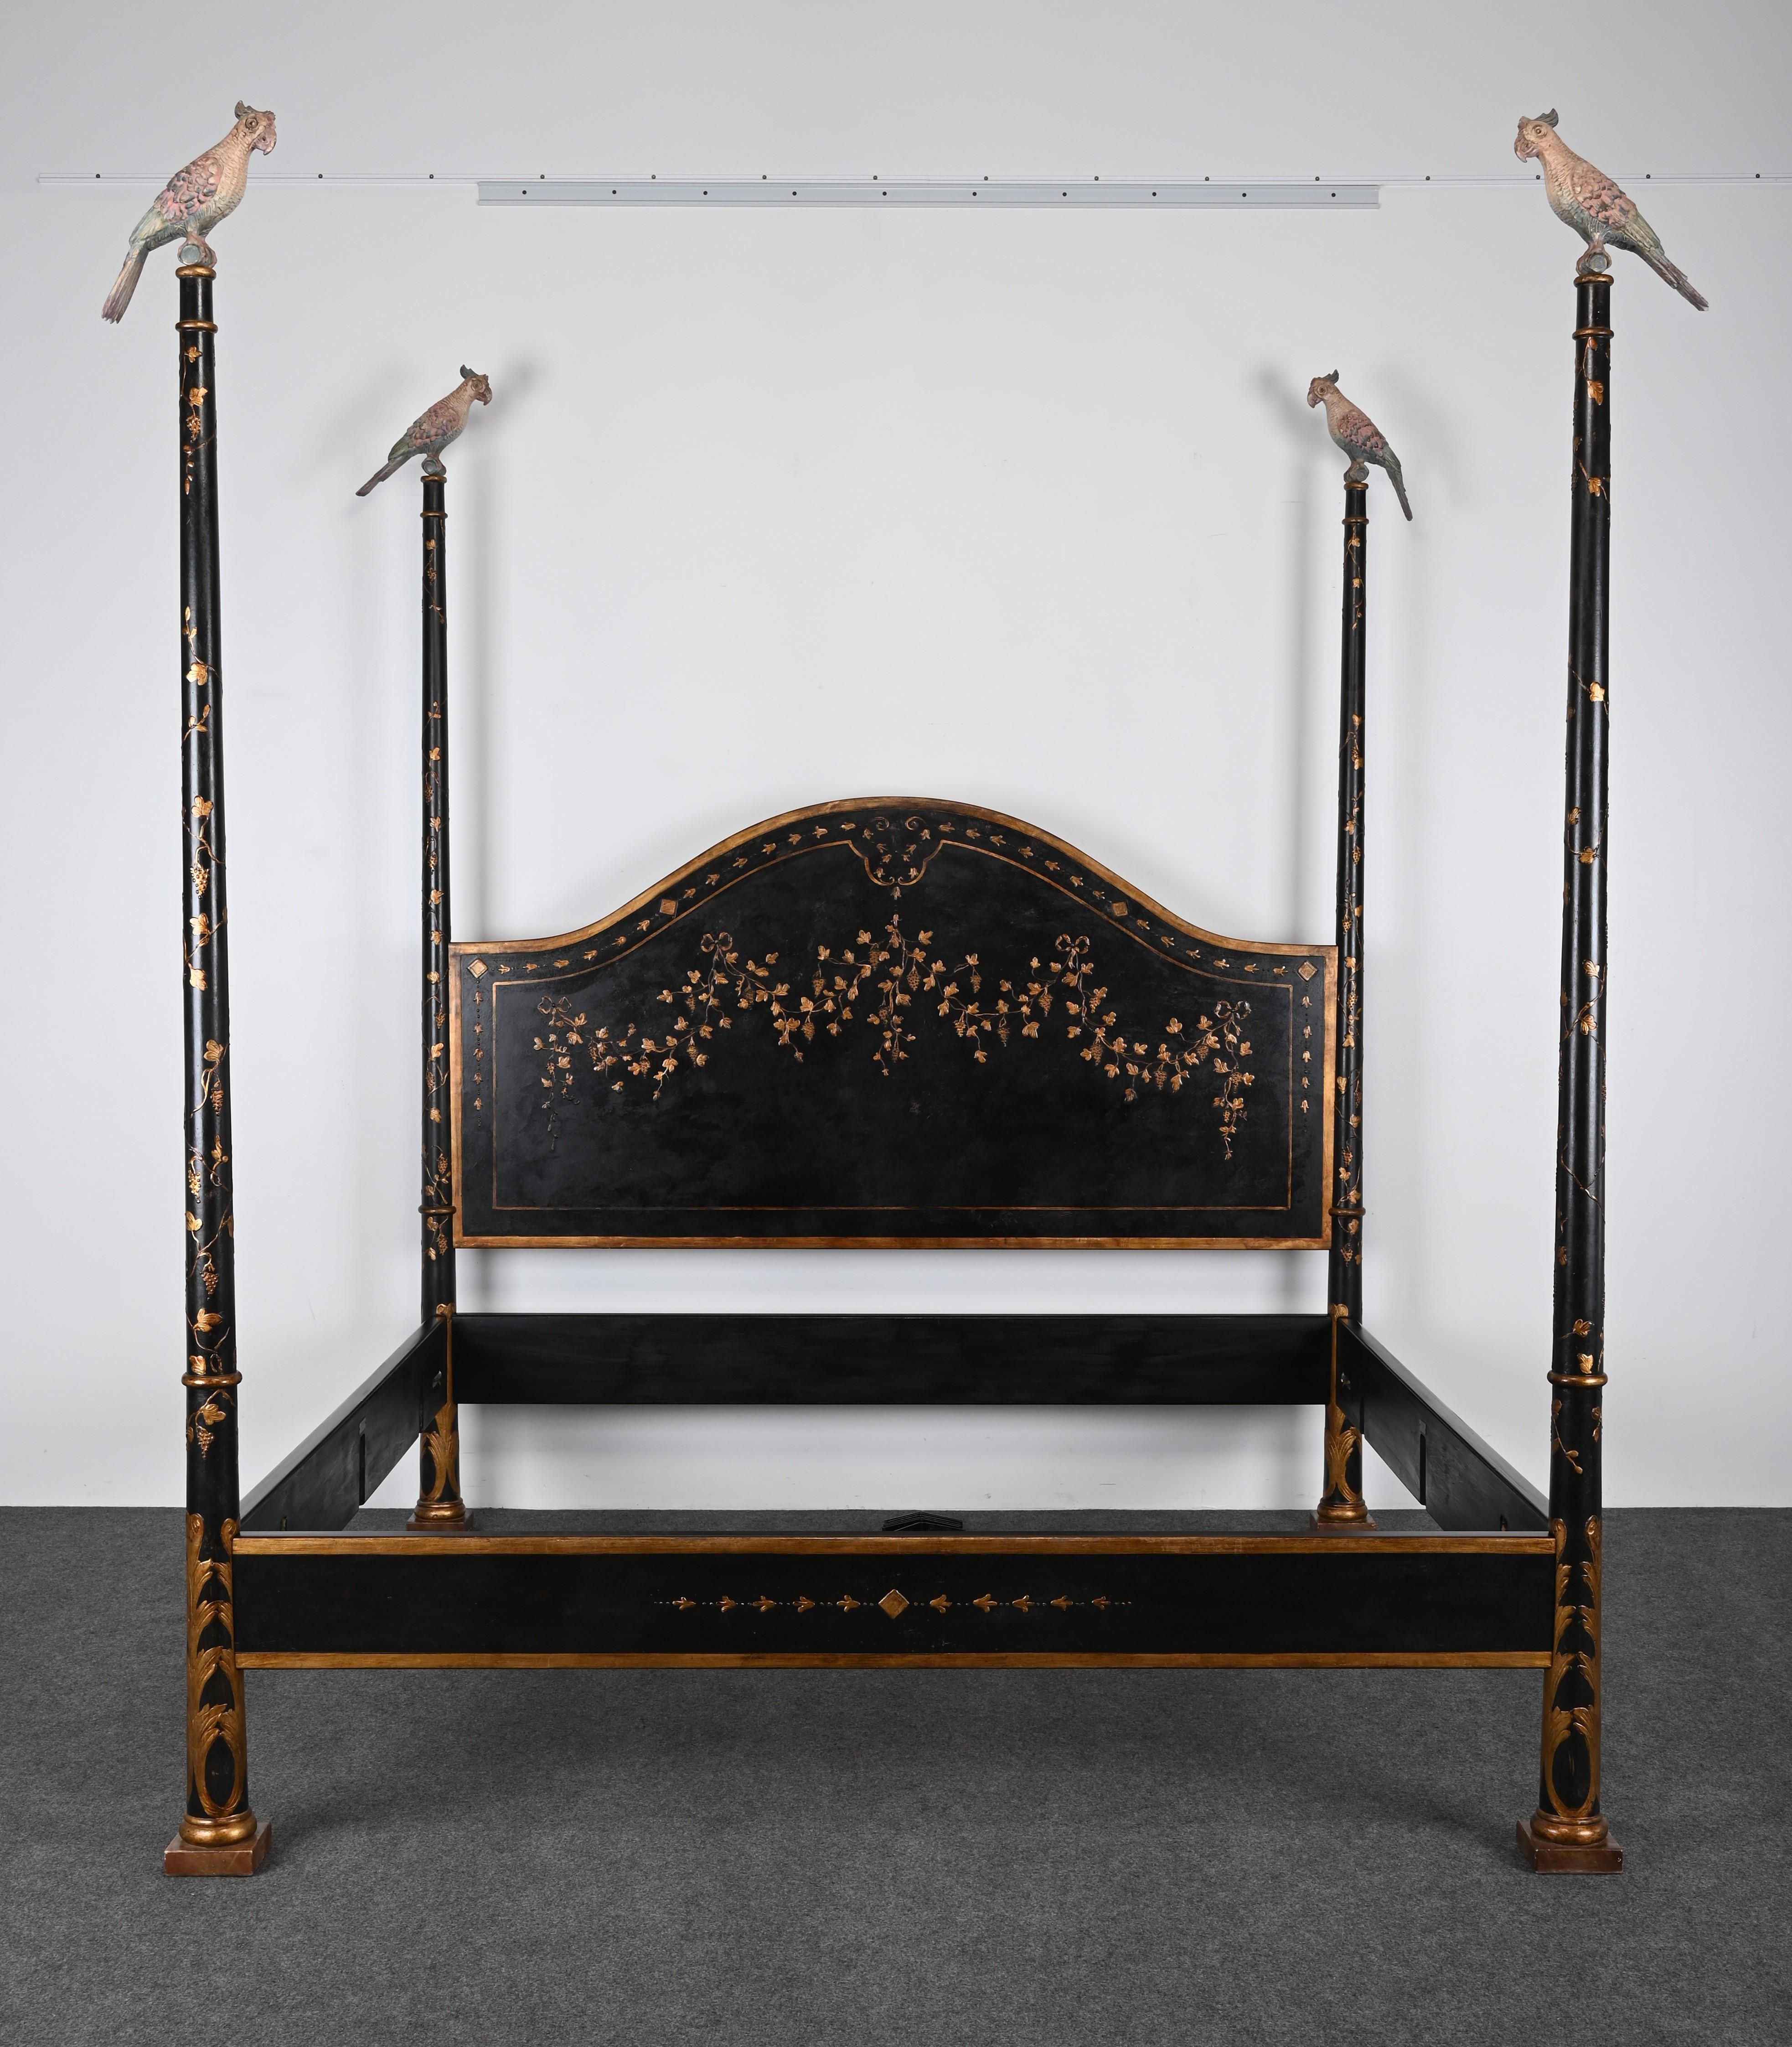 A lovely Italian Hand-painted Poster Bed by Patina furniture company, 1980s. This Italian bed has a beautiful hand-painted aged patinated finish. This whimsical poster bed has hand-carved parrots perching on top of hand-painted posts. Includes six